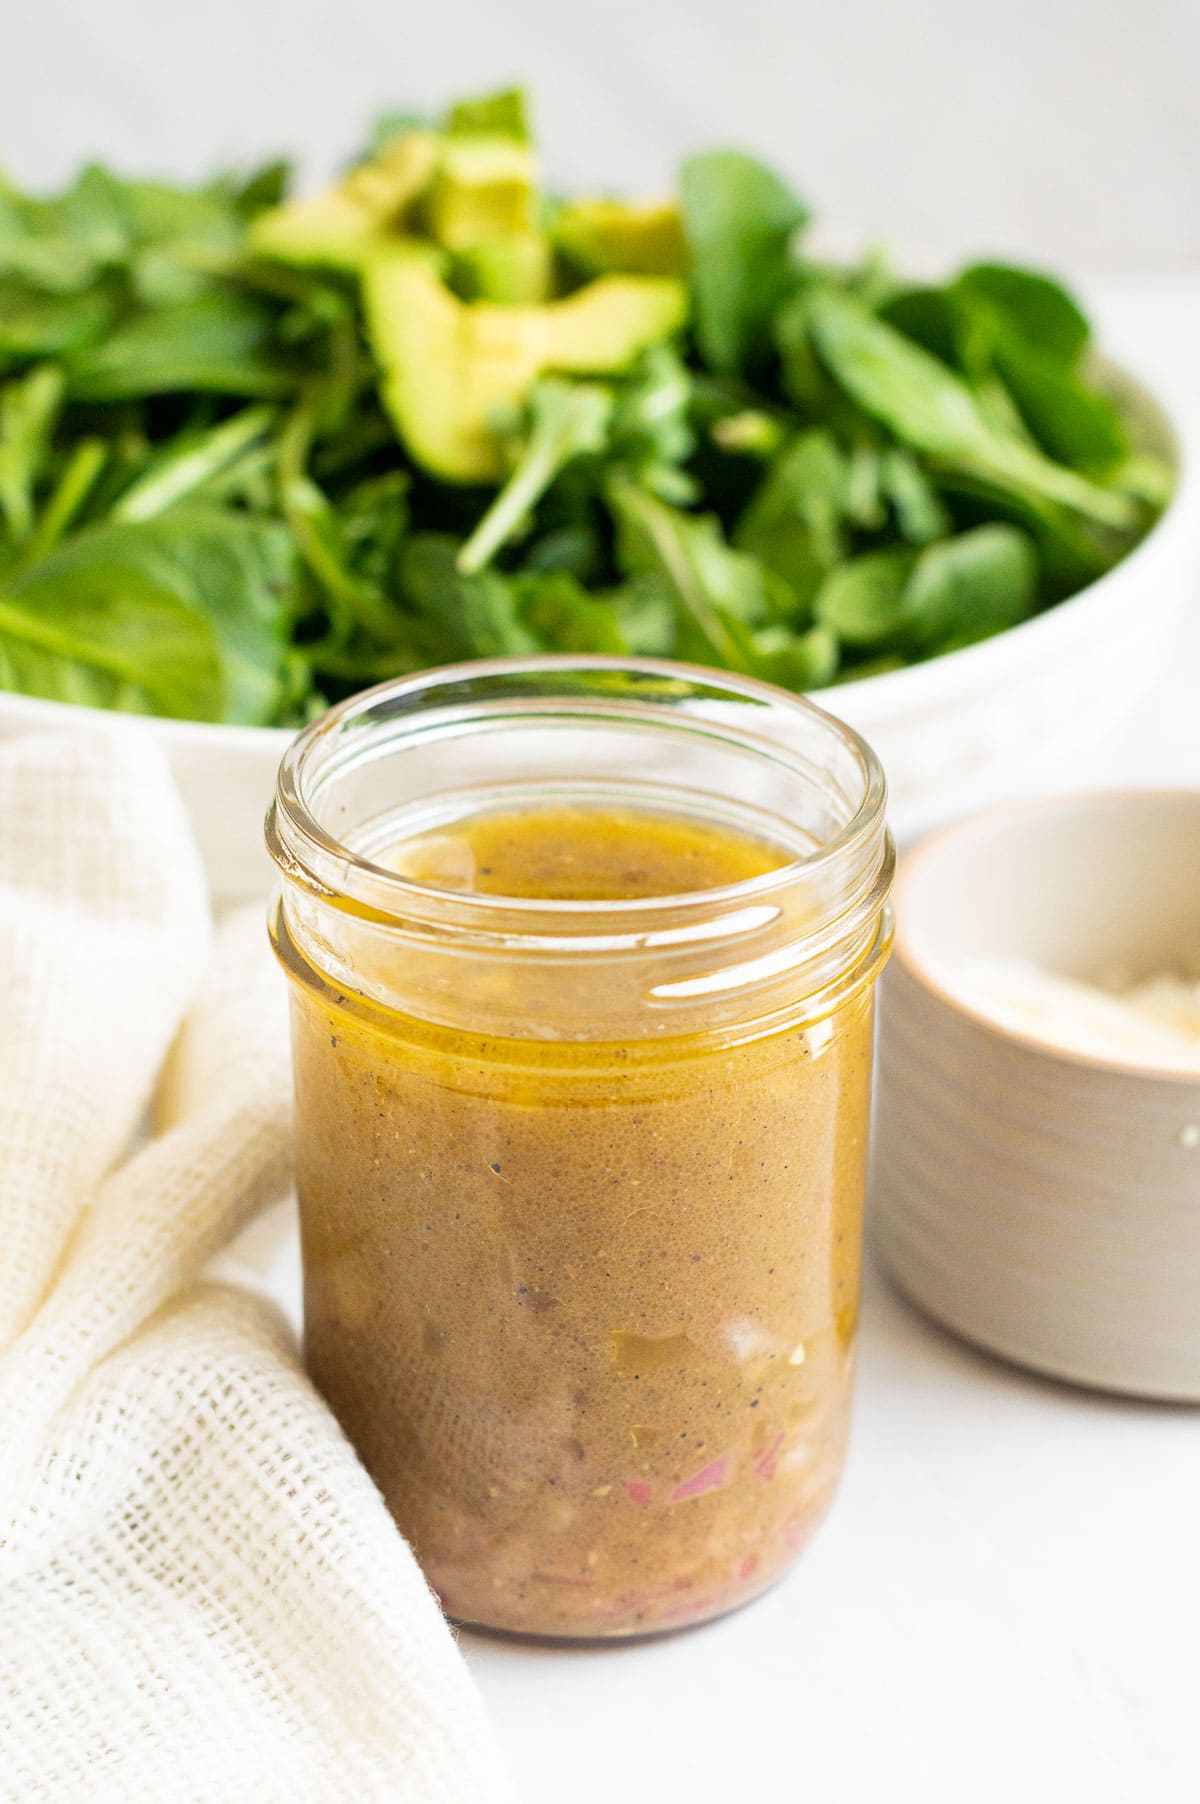 Spinach salad dressing in a glass jar with spinach salad and parmesan cheese in bowls on a counter.